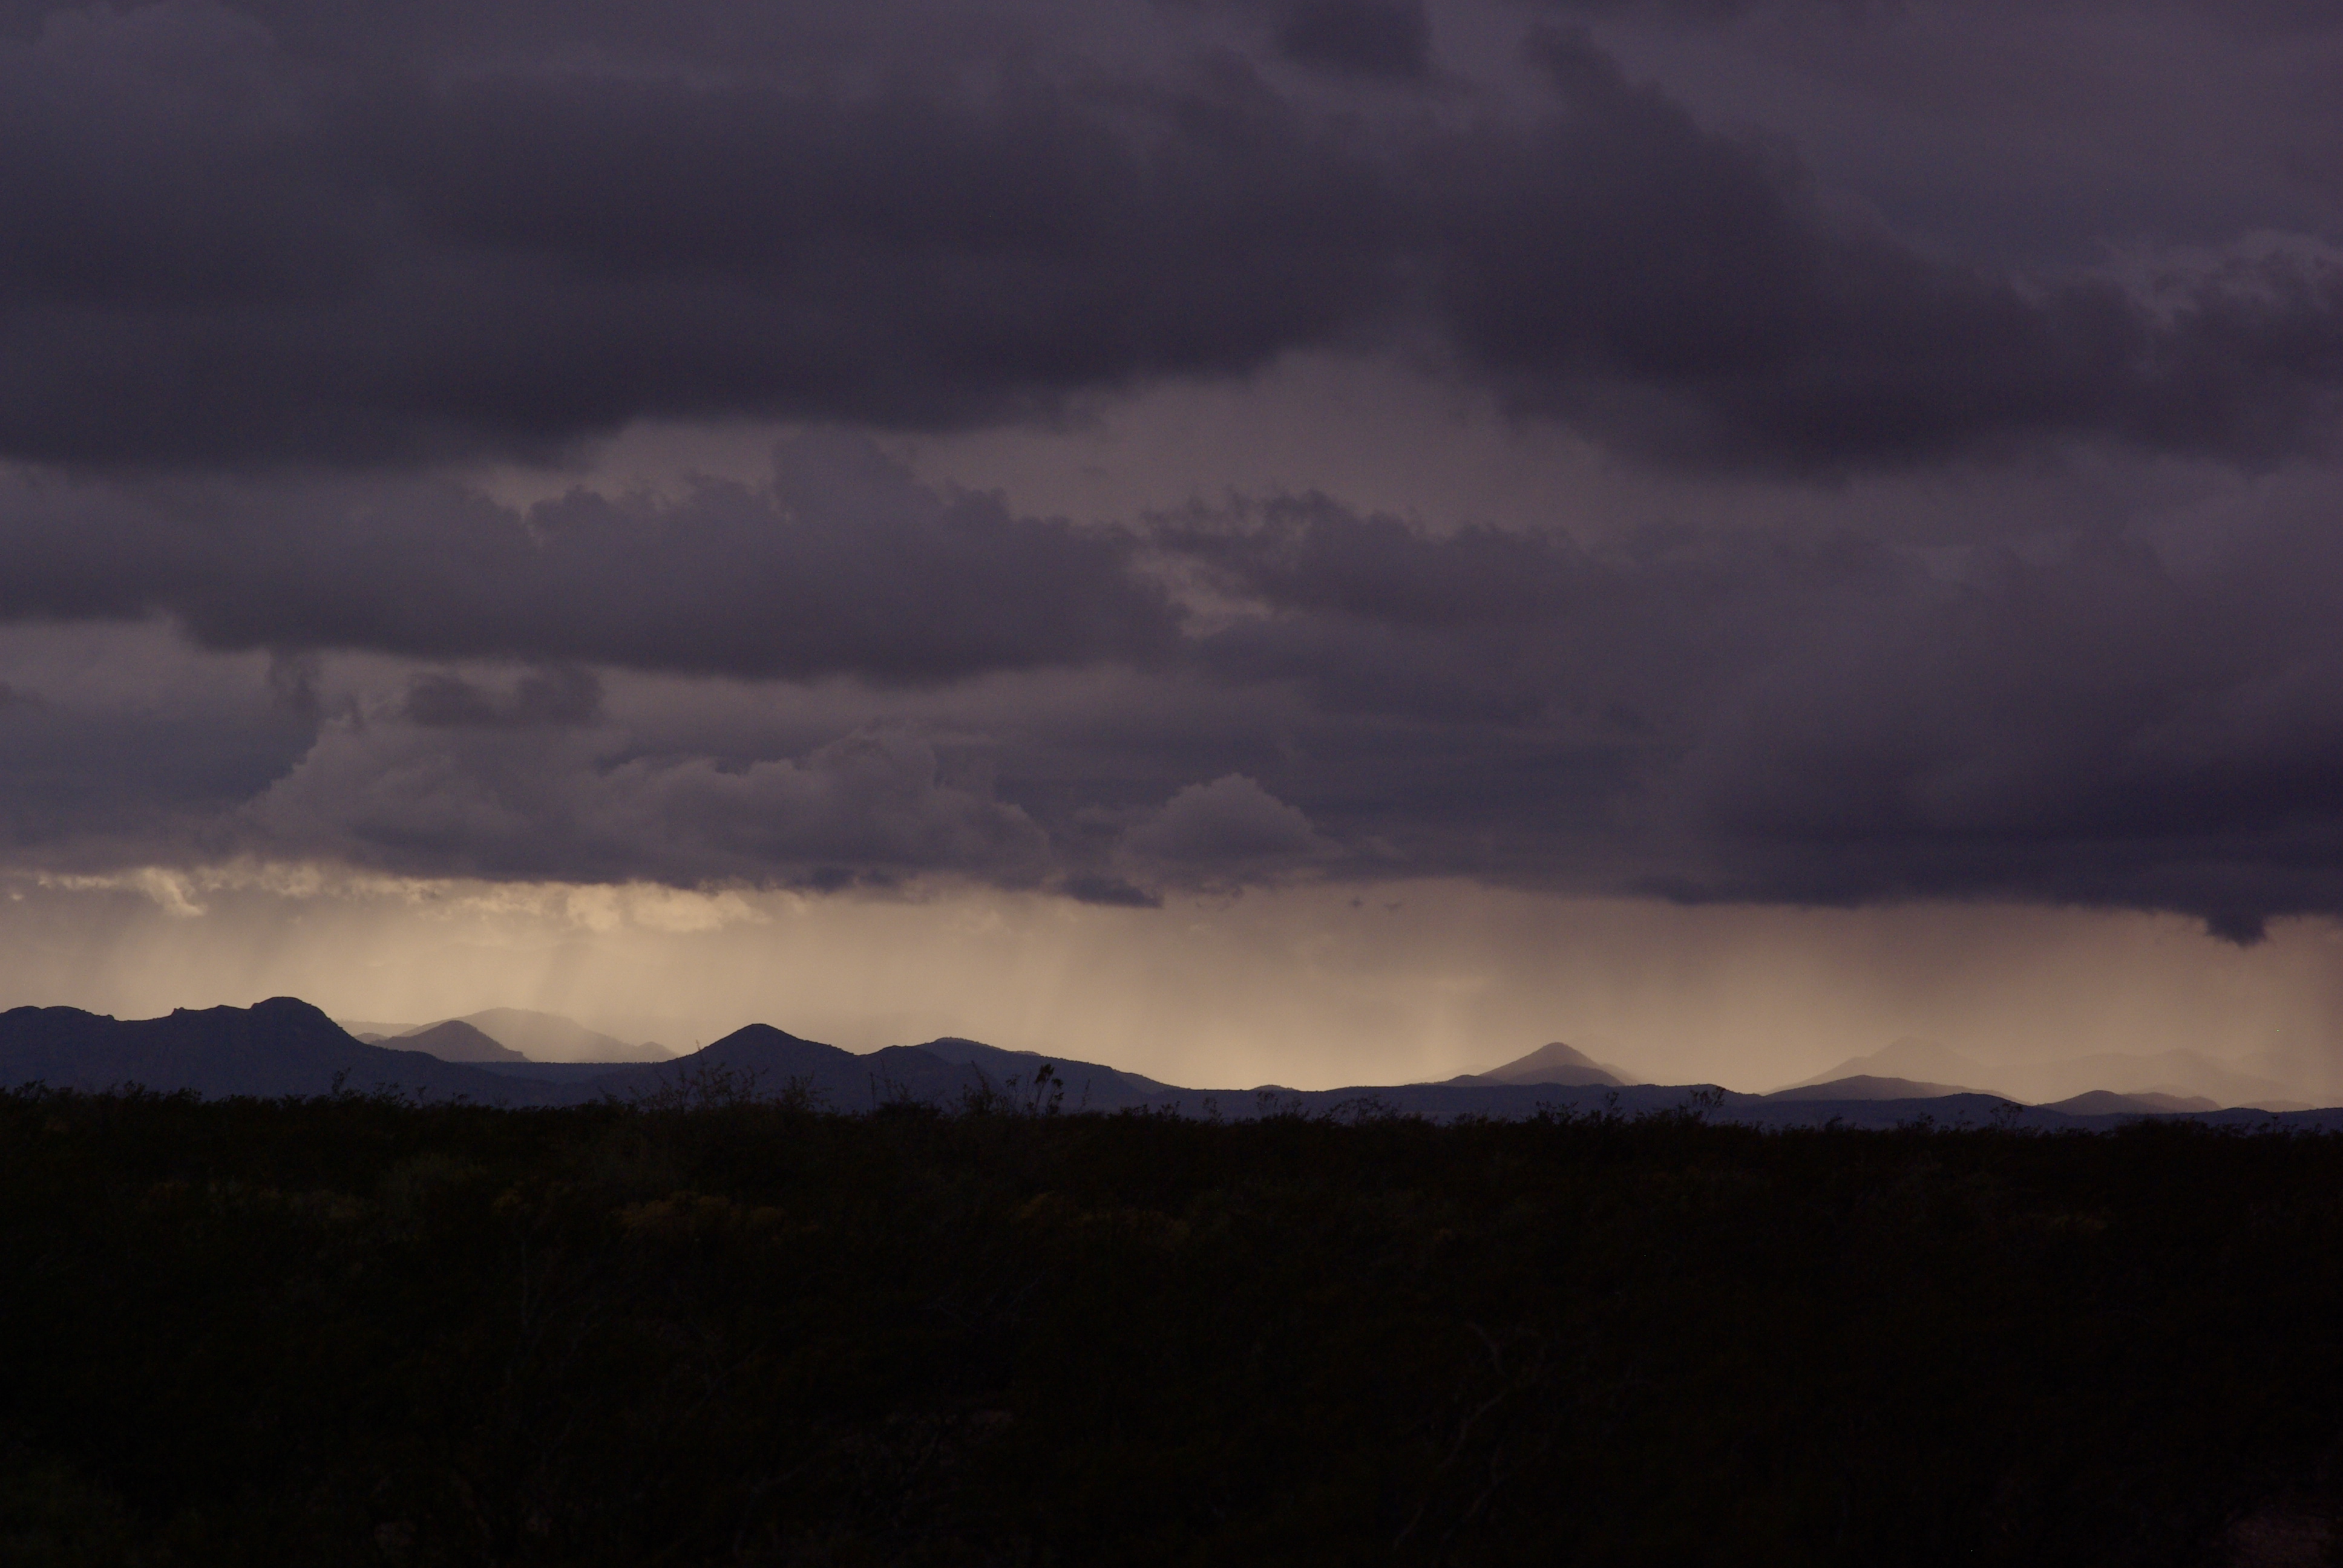 Rain near Truth or Consequences, NM, October 2015